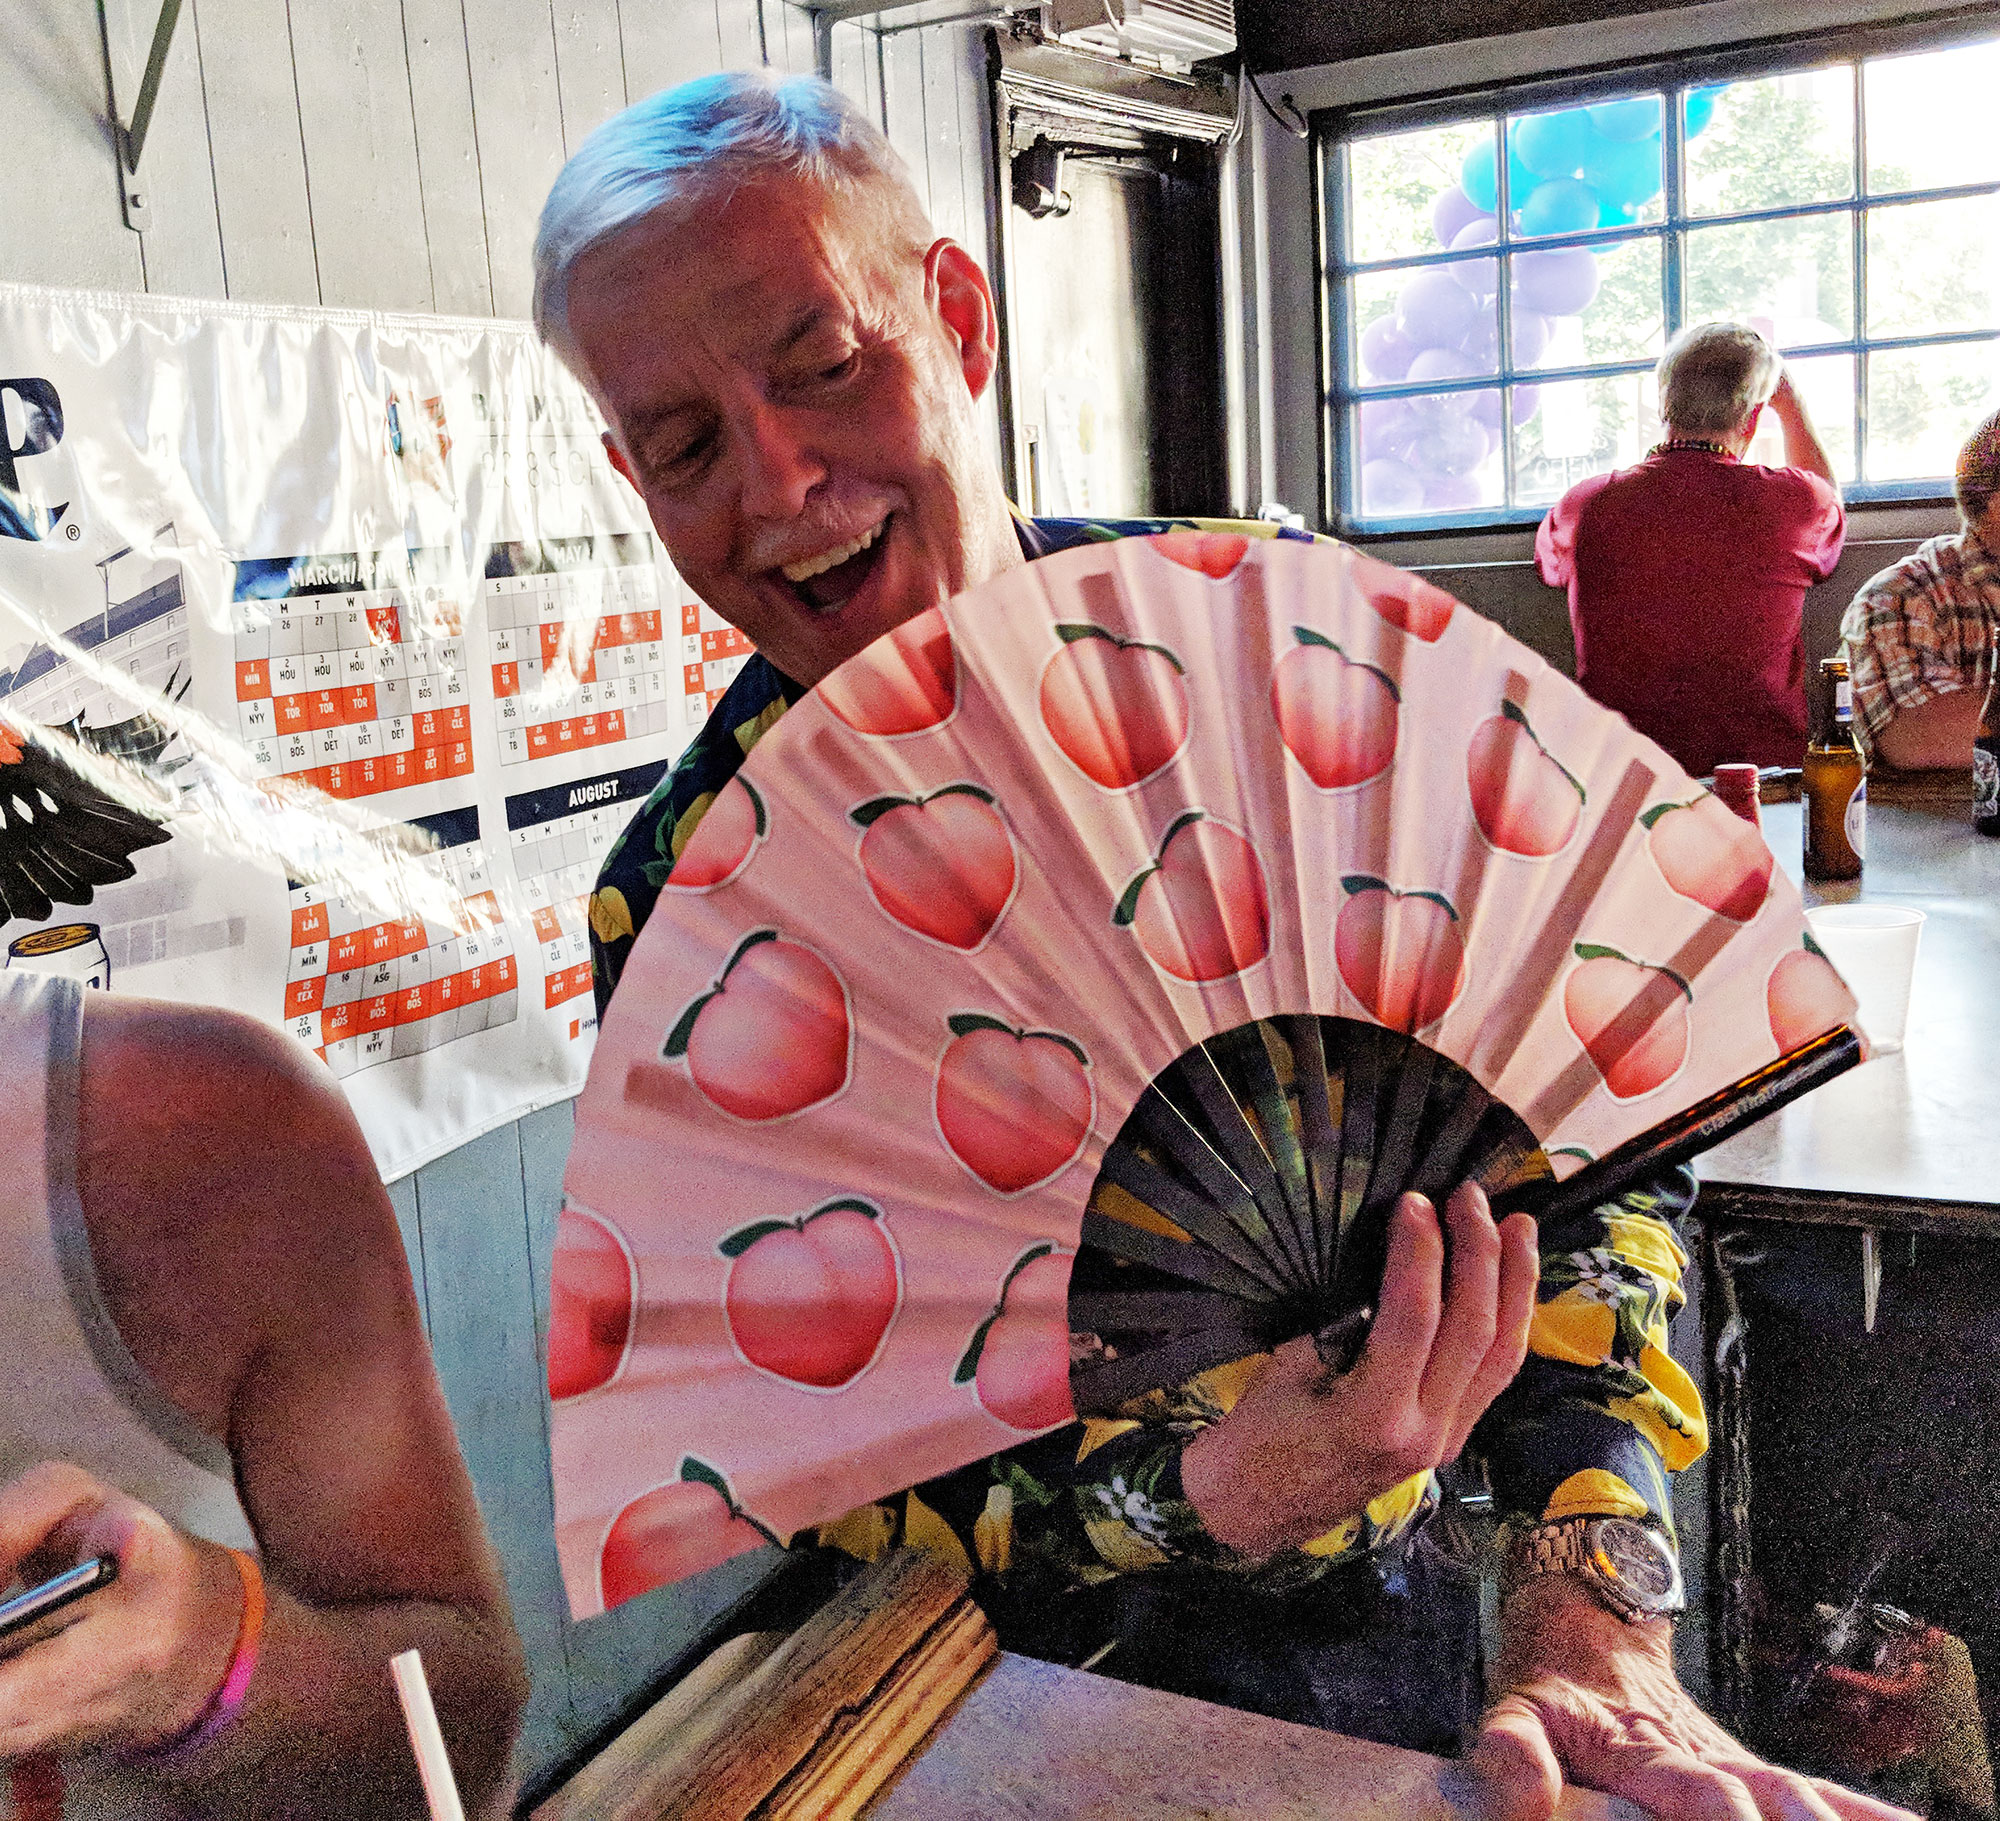 A man clacking the fan at "The Drinkery" bar in Baltimore.